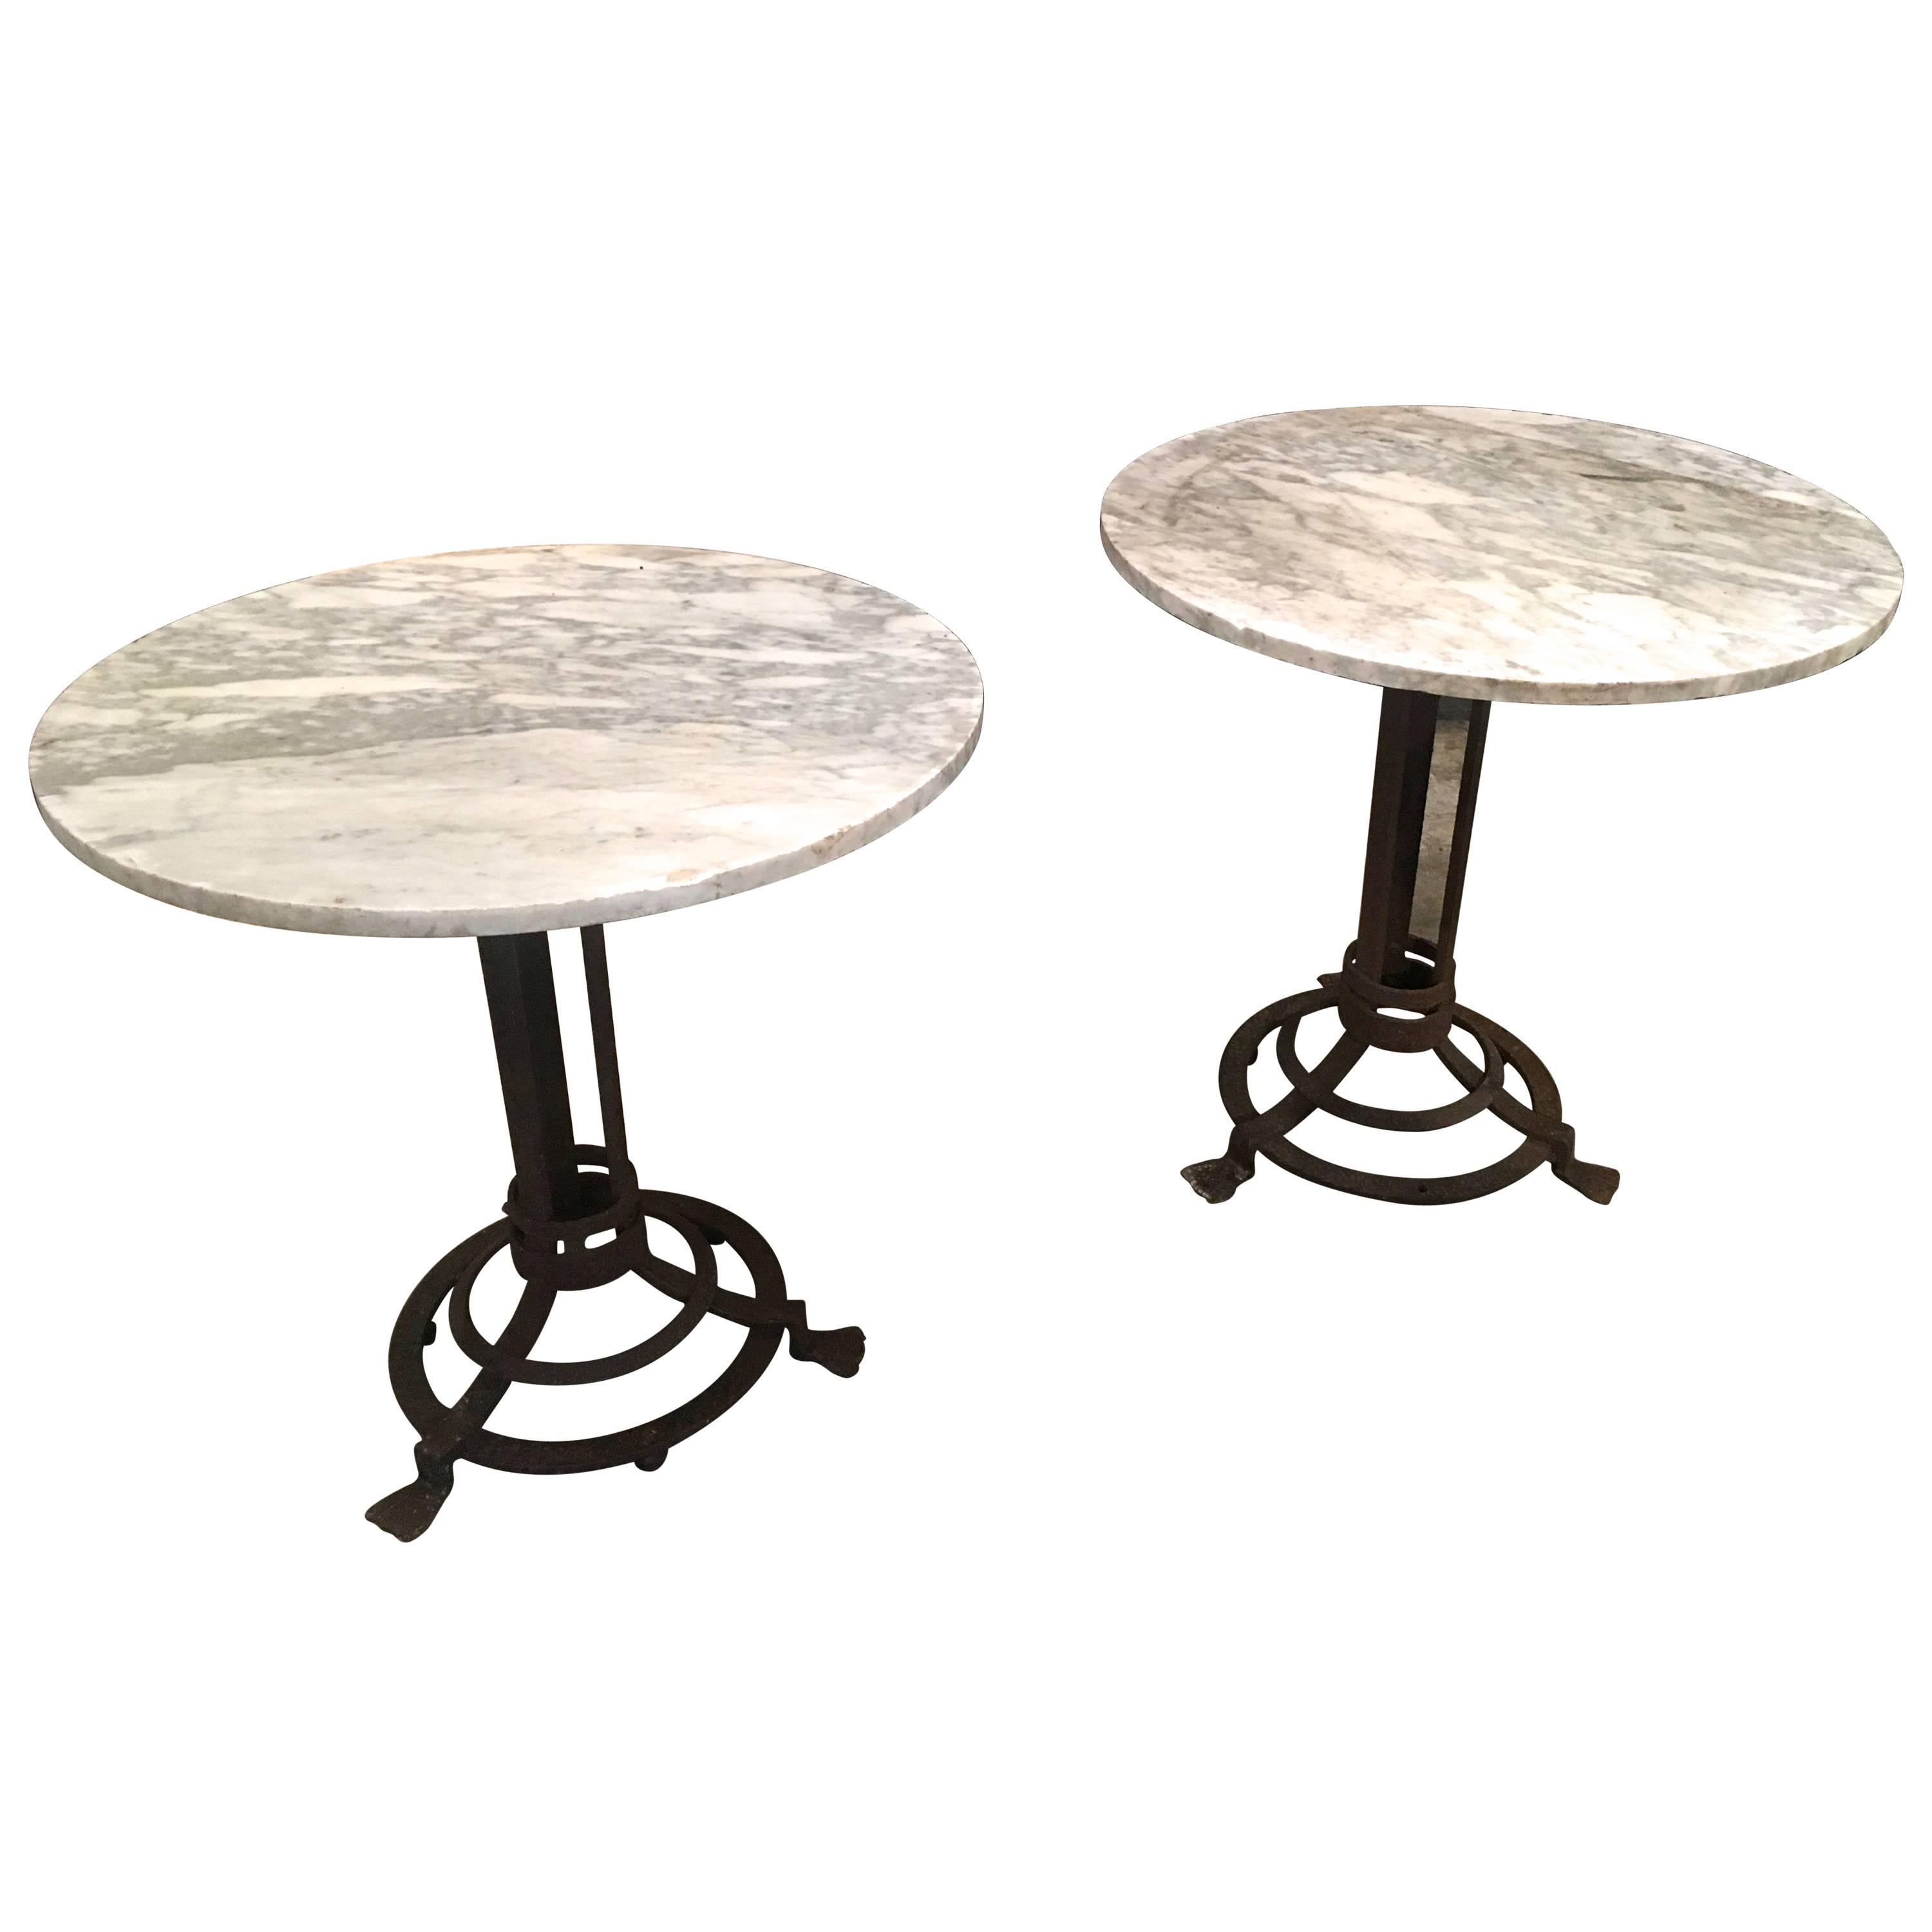 Pair of French Wrought Iron Gueridon Tables with Marble Tops